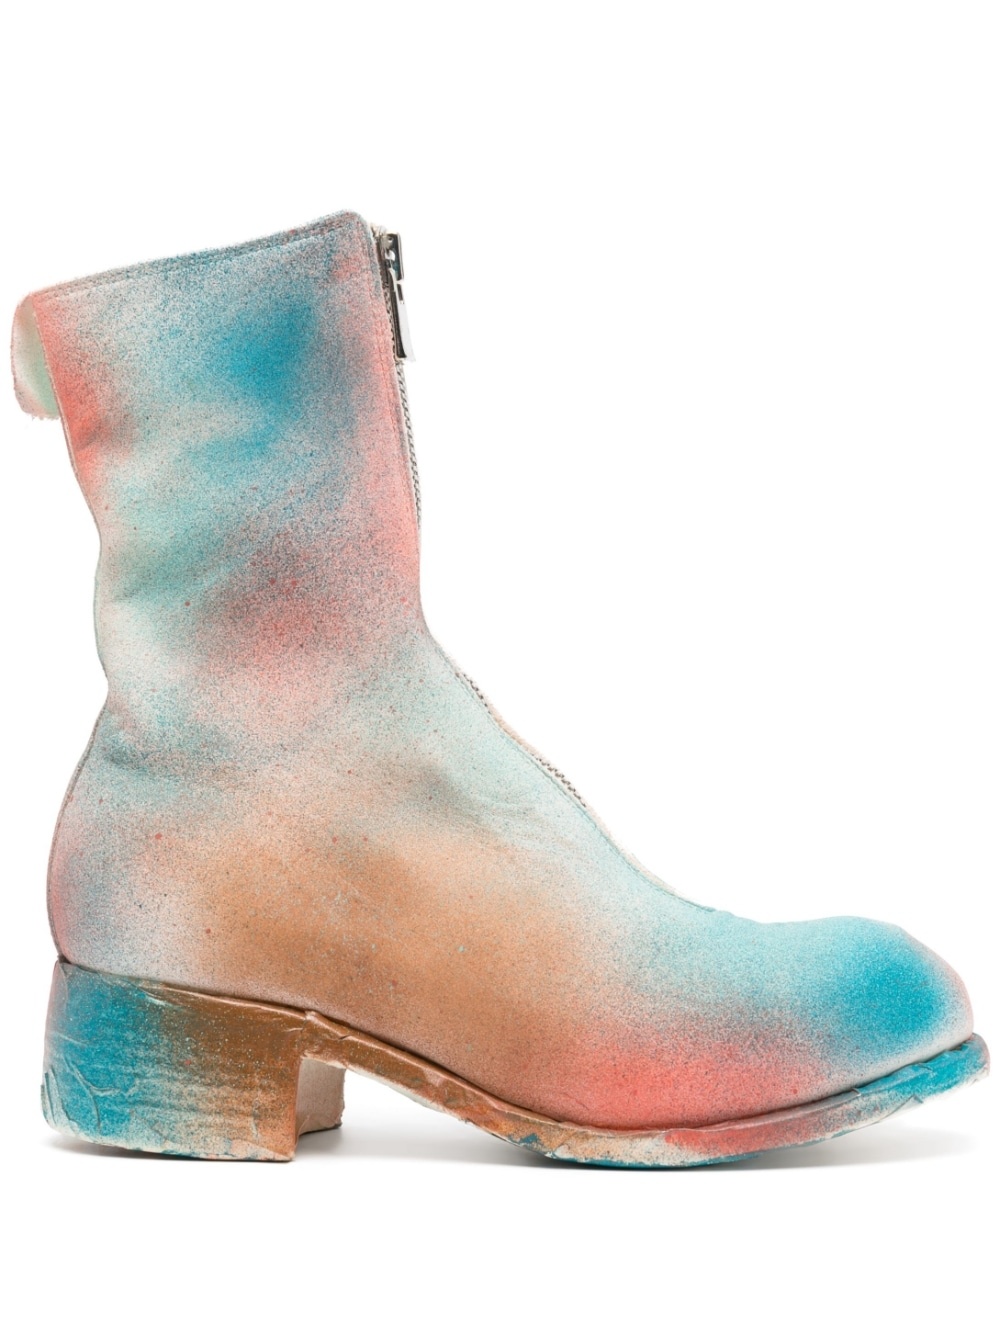 spray-paint effect boots - 1